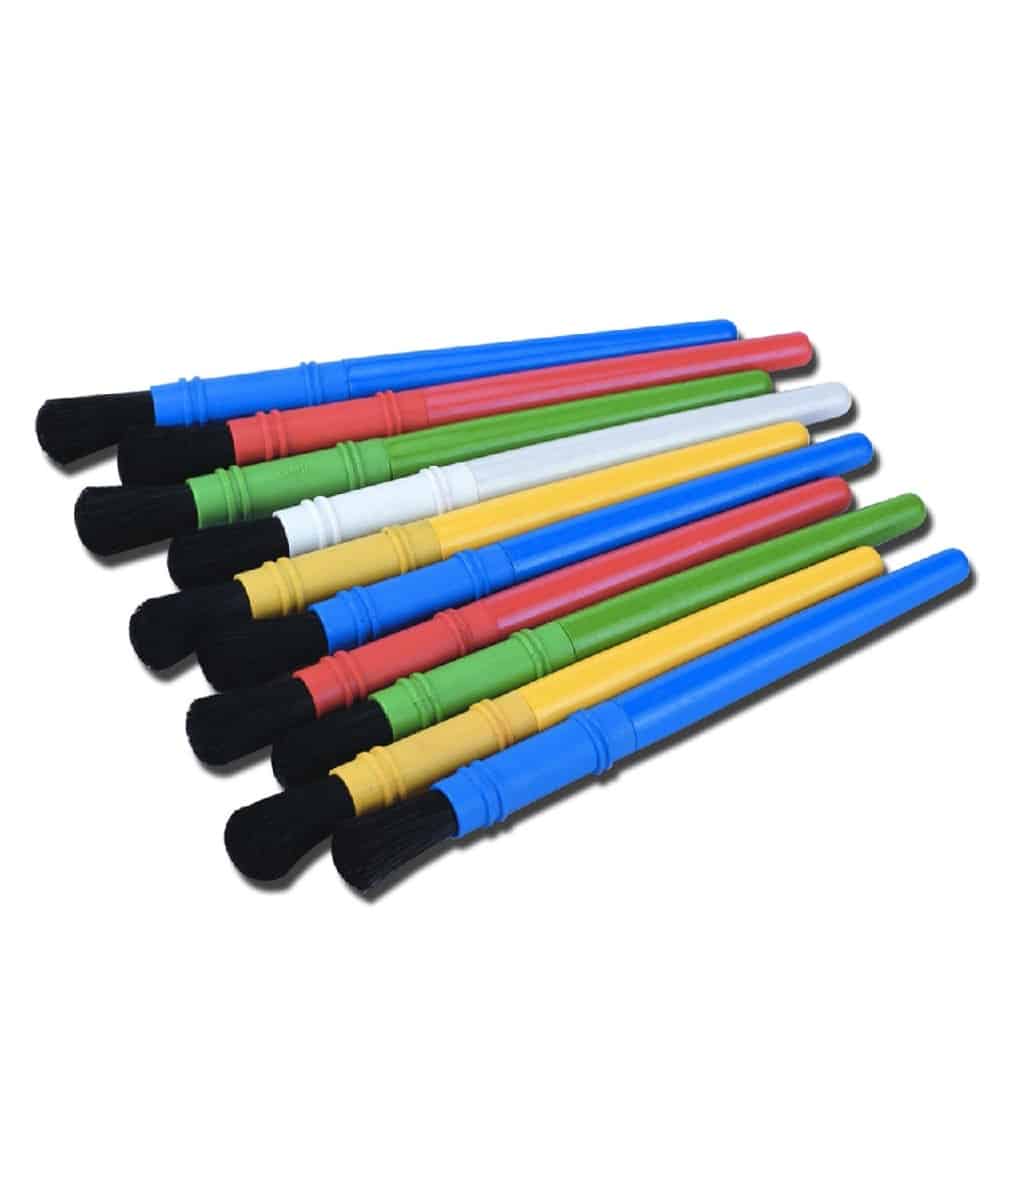 Stubby-Grip Paint Brushes - 10 Pack